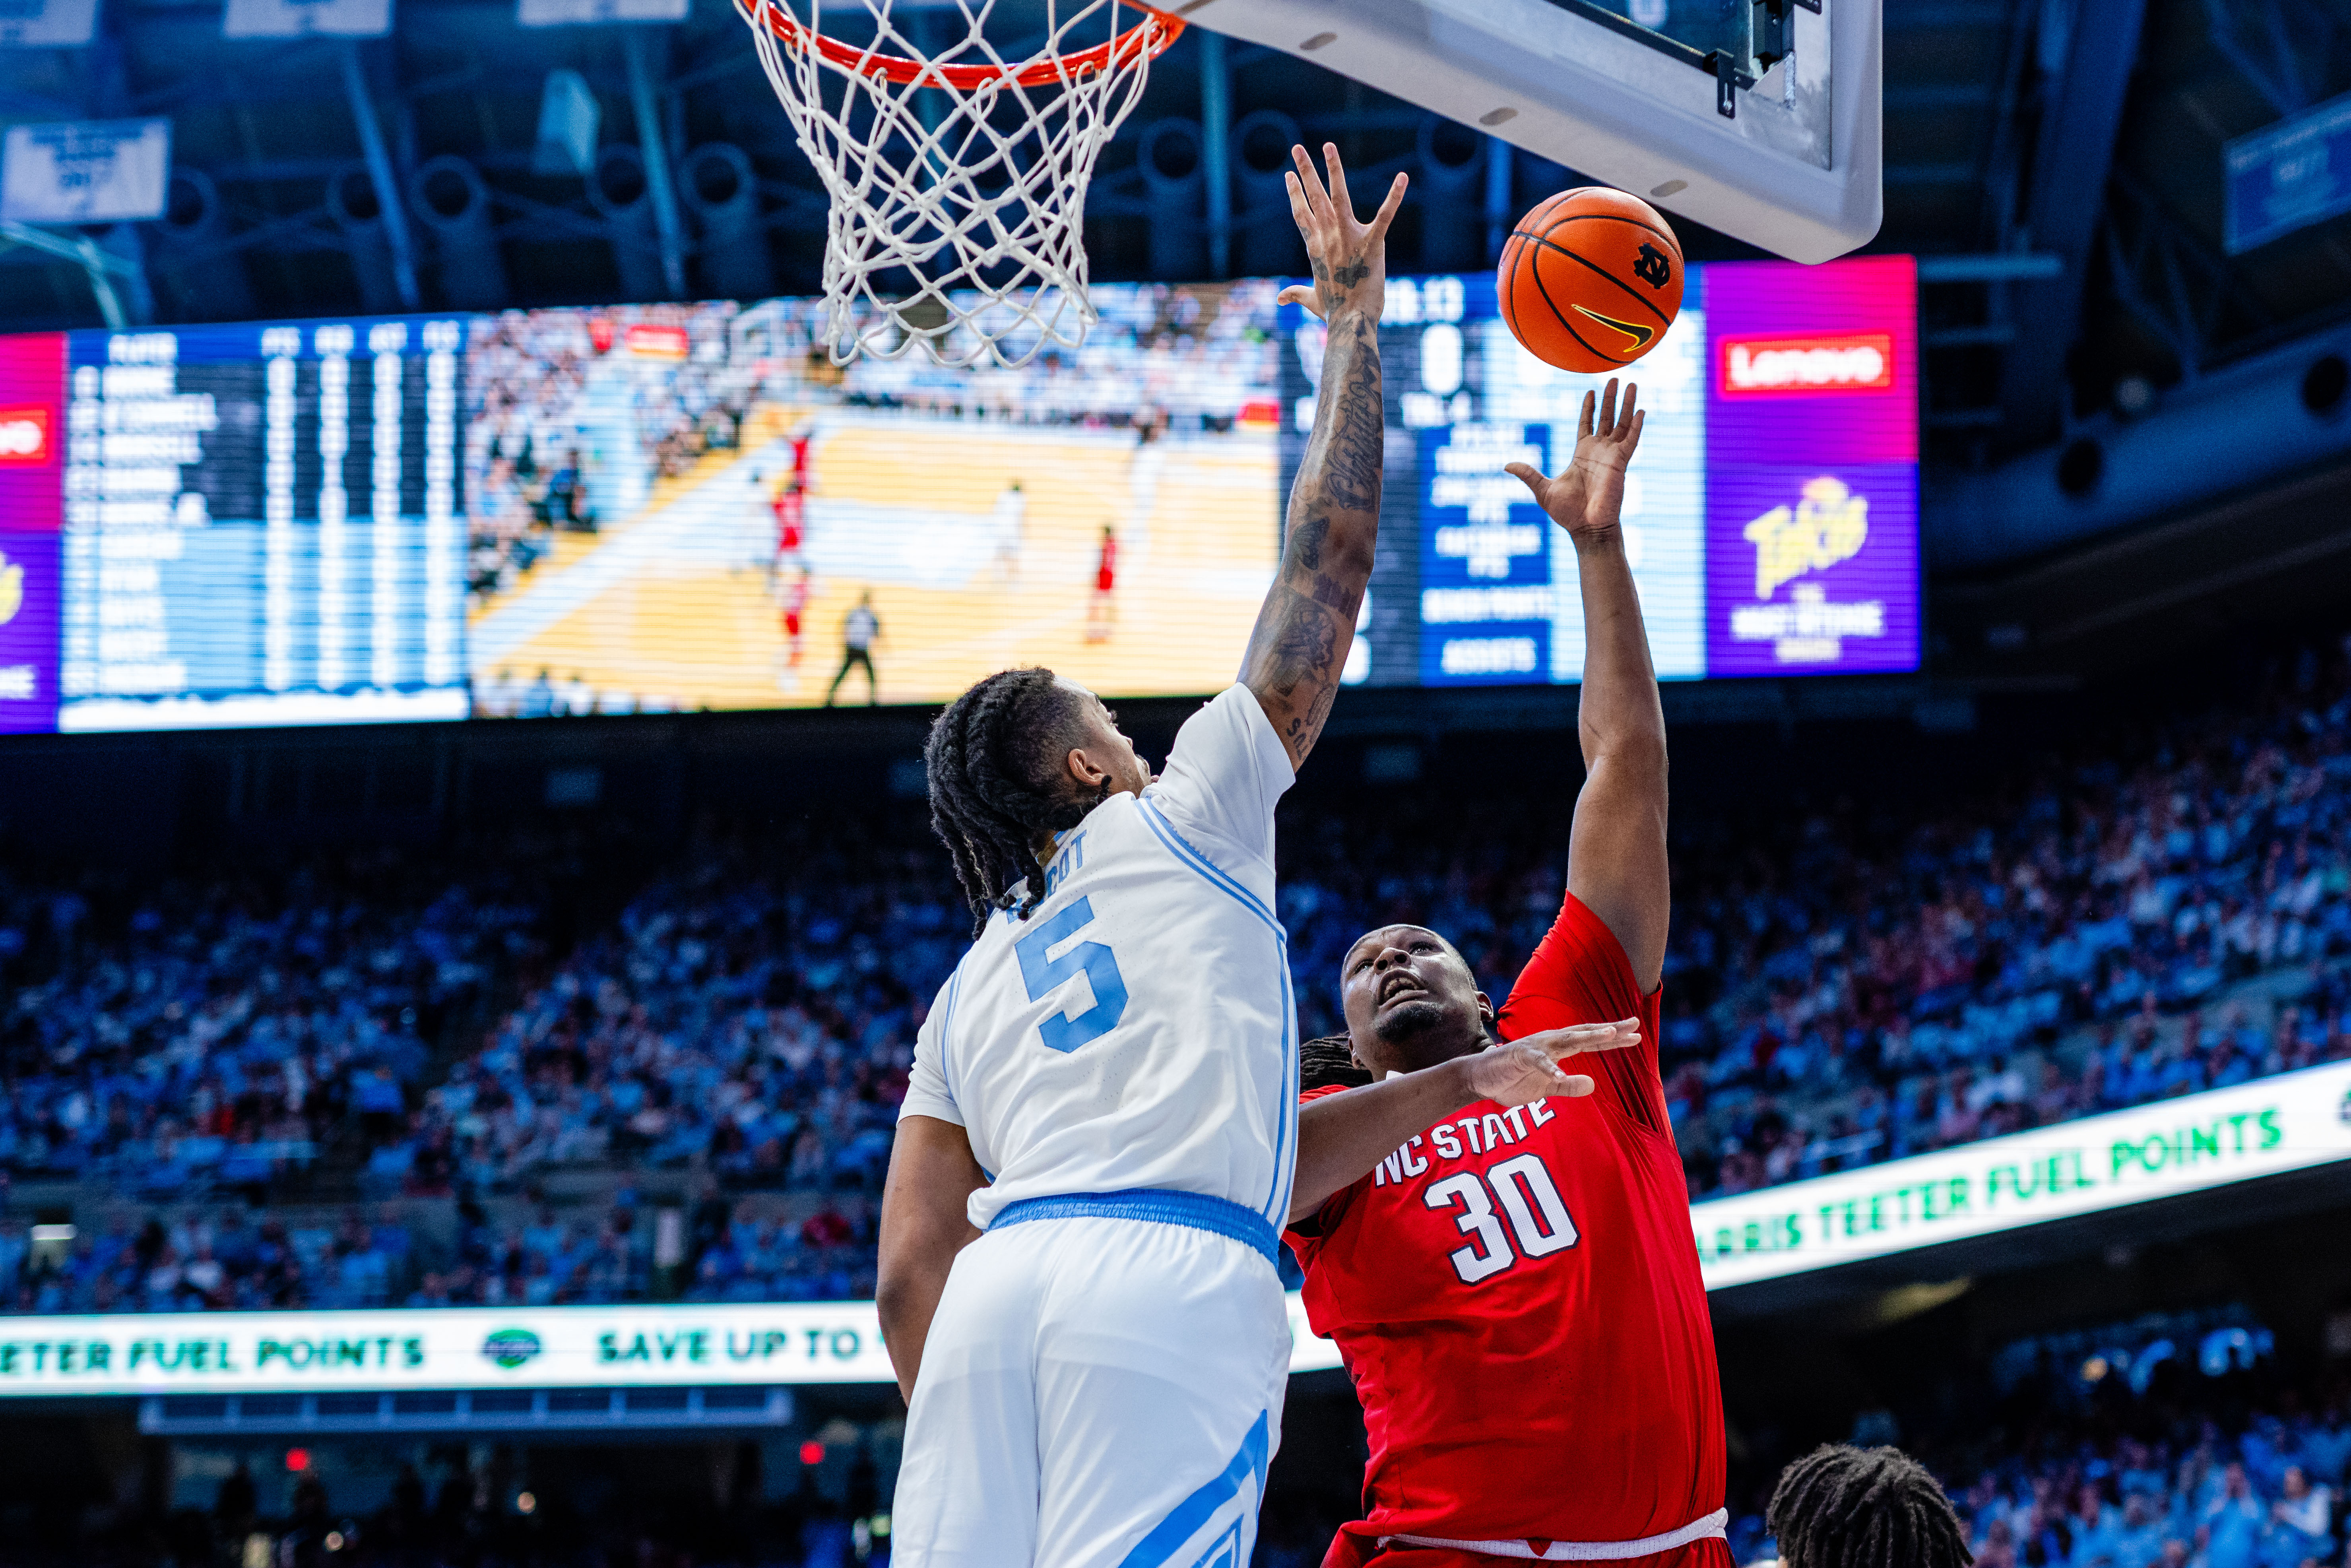 What went right and wrong in UNC’s win against NC State